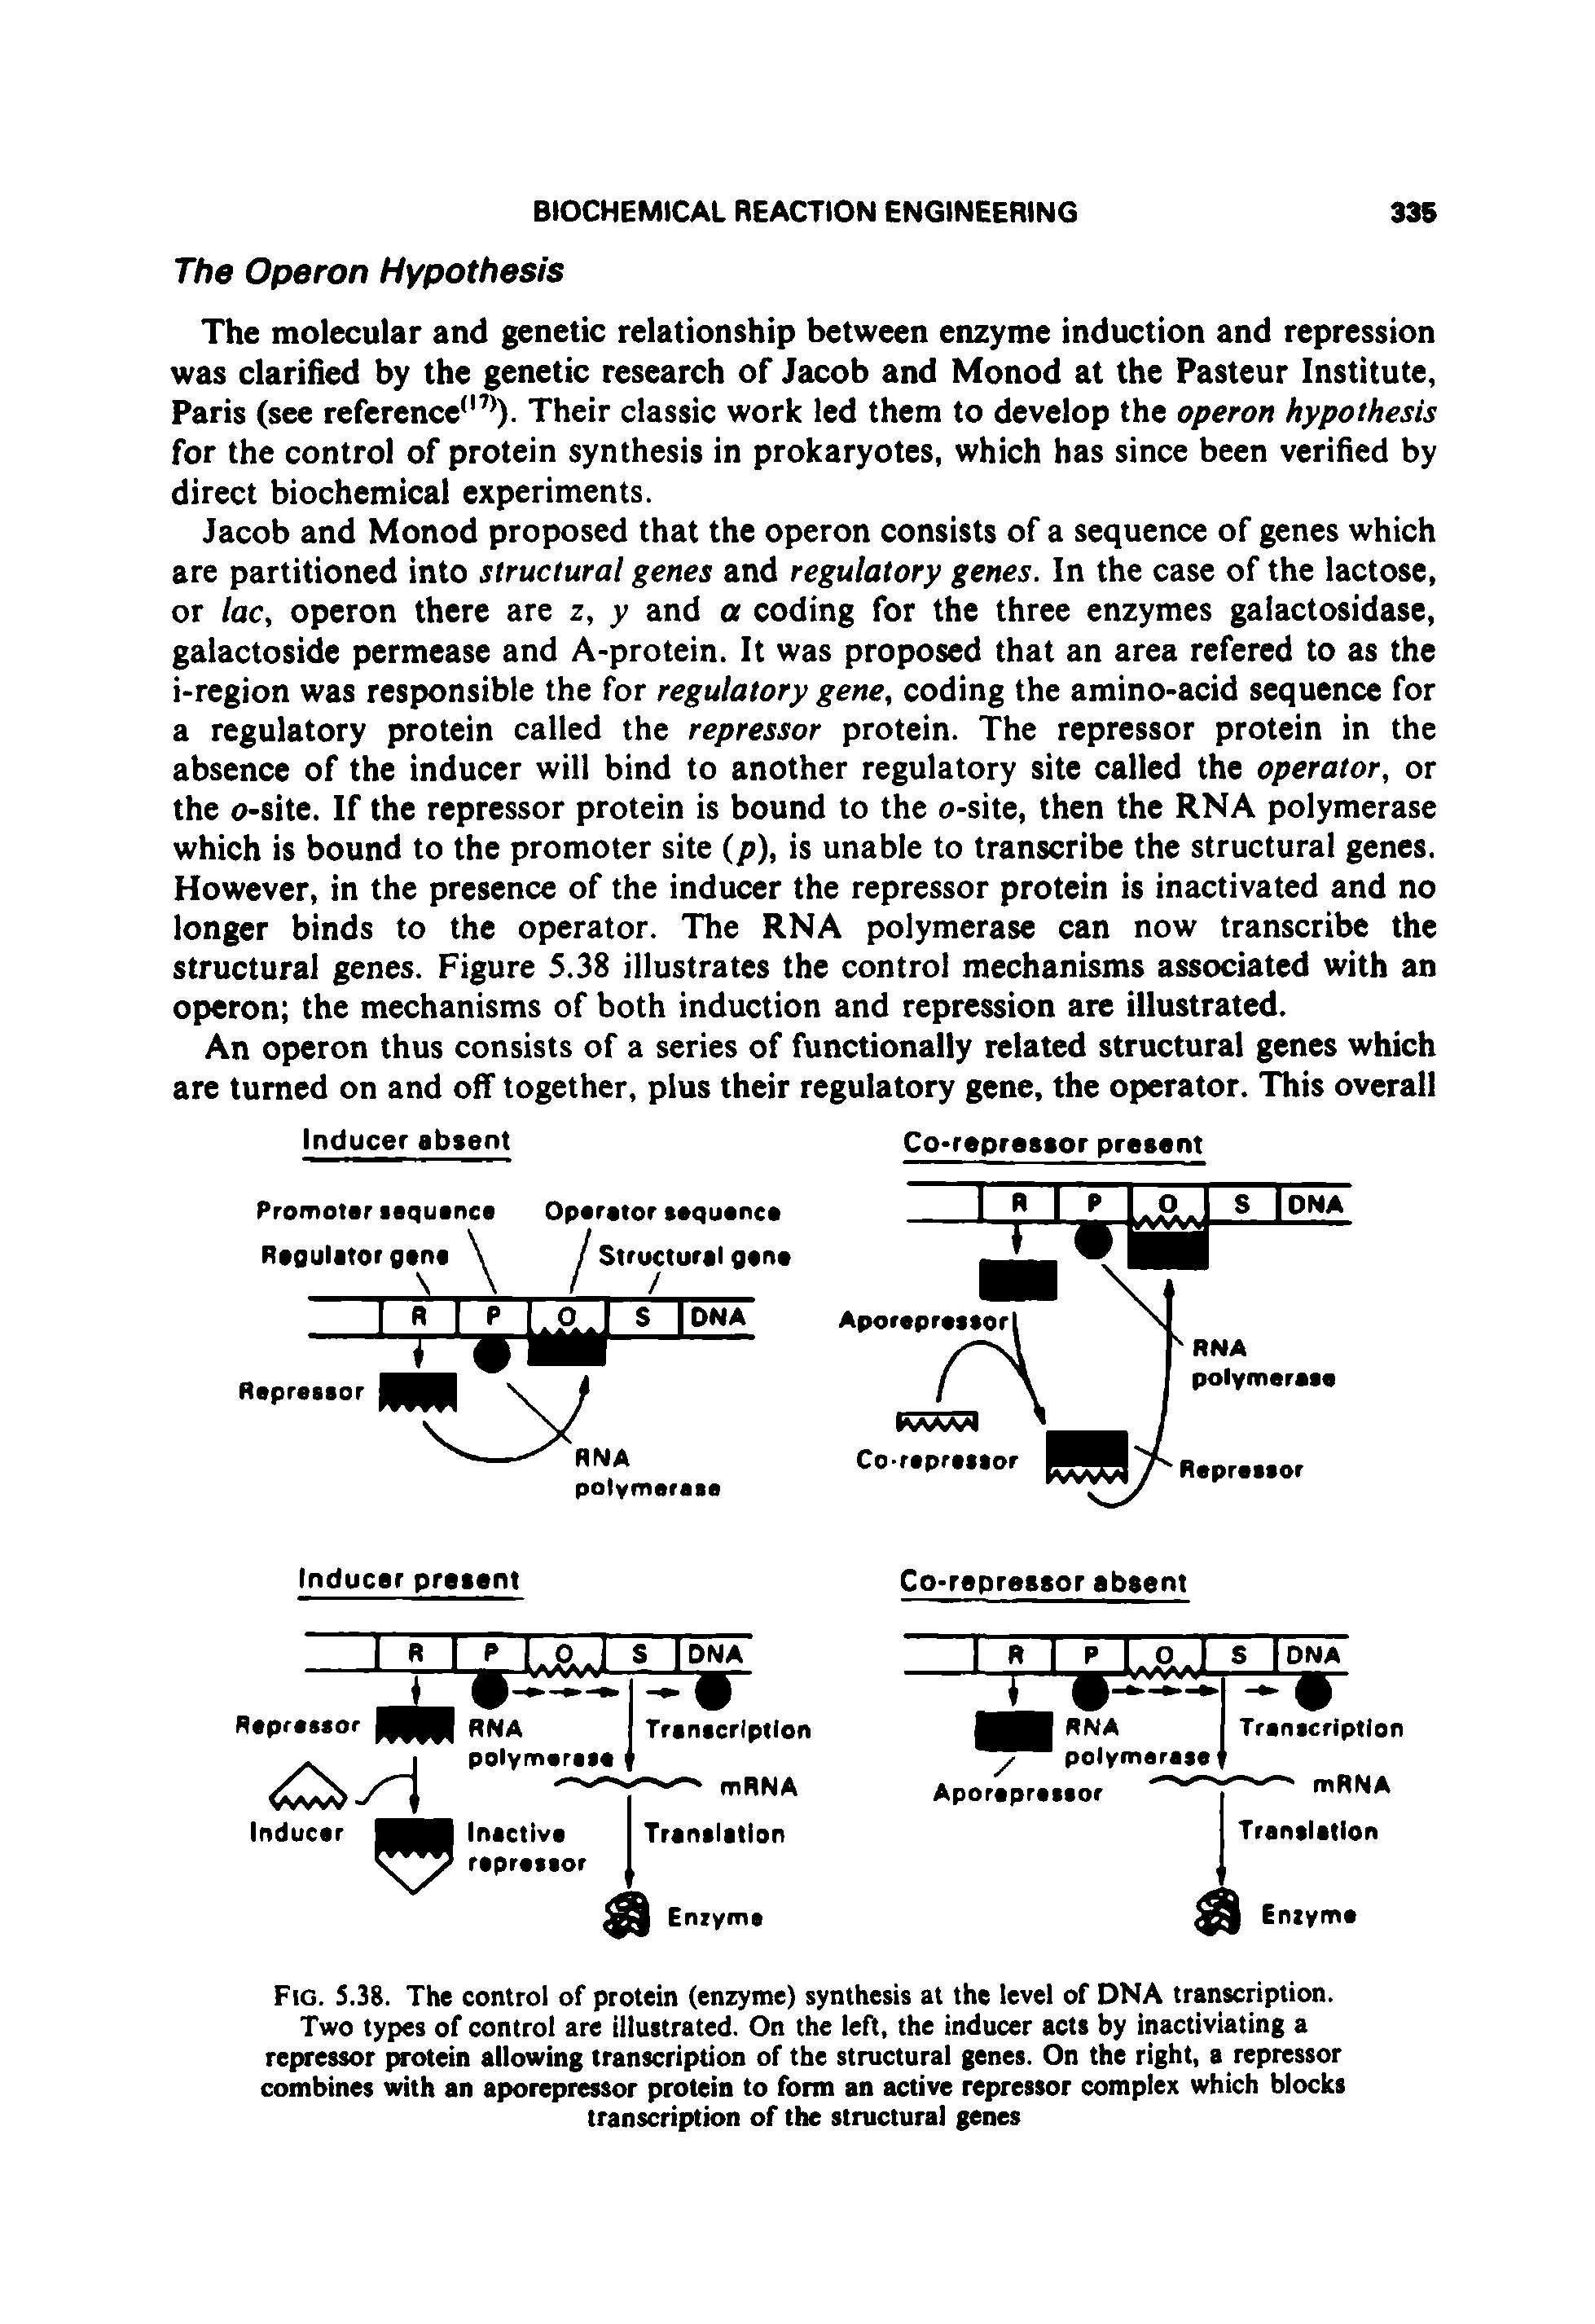 Fig. 5.38. The control of protein (enzyme) synthesis at the level of DNA transcription.